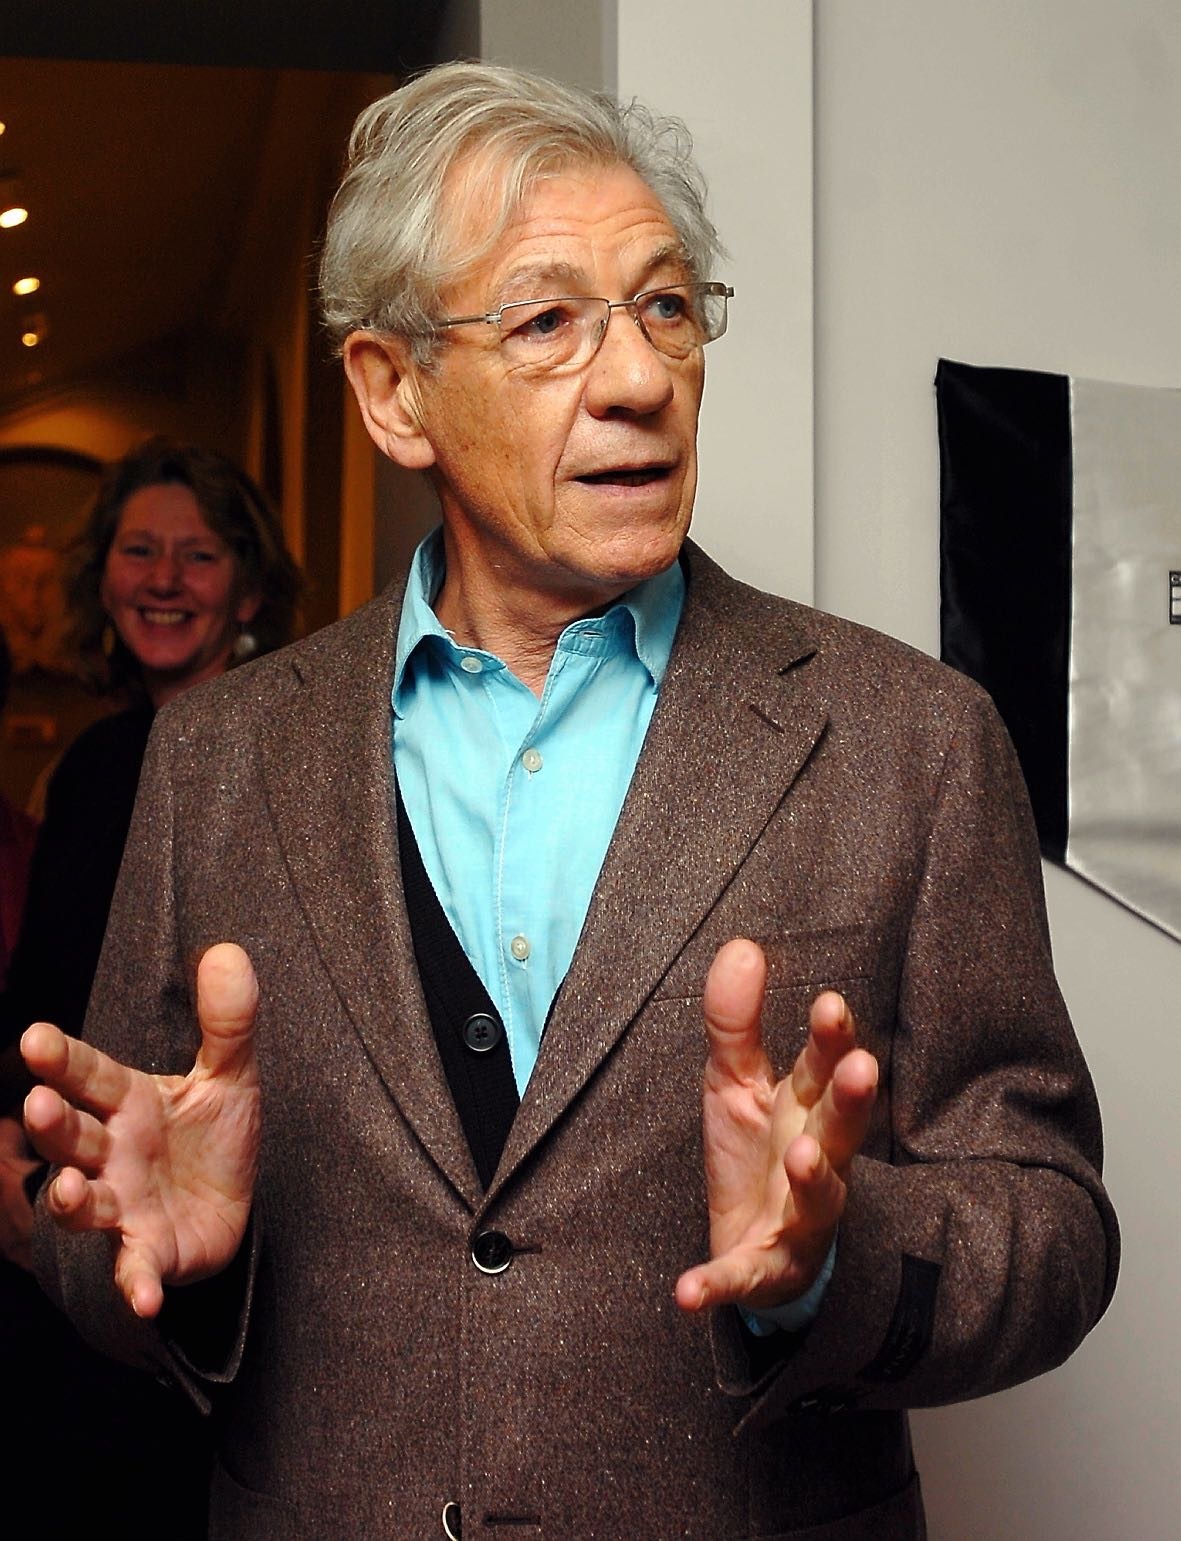 Sir Ian McKellen during his speech at the Cotswold Playhouse in Stroud where he opened new extension in 2009